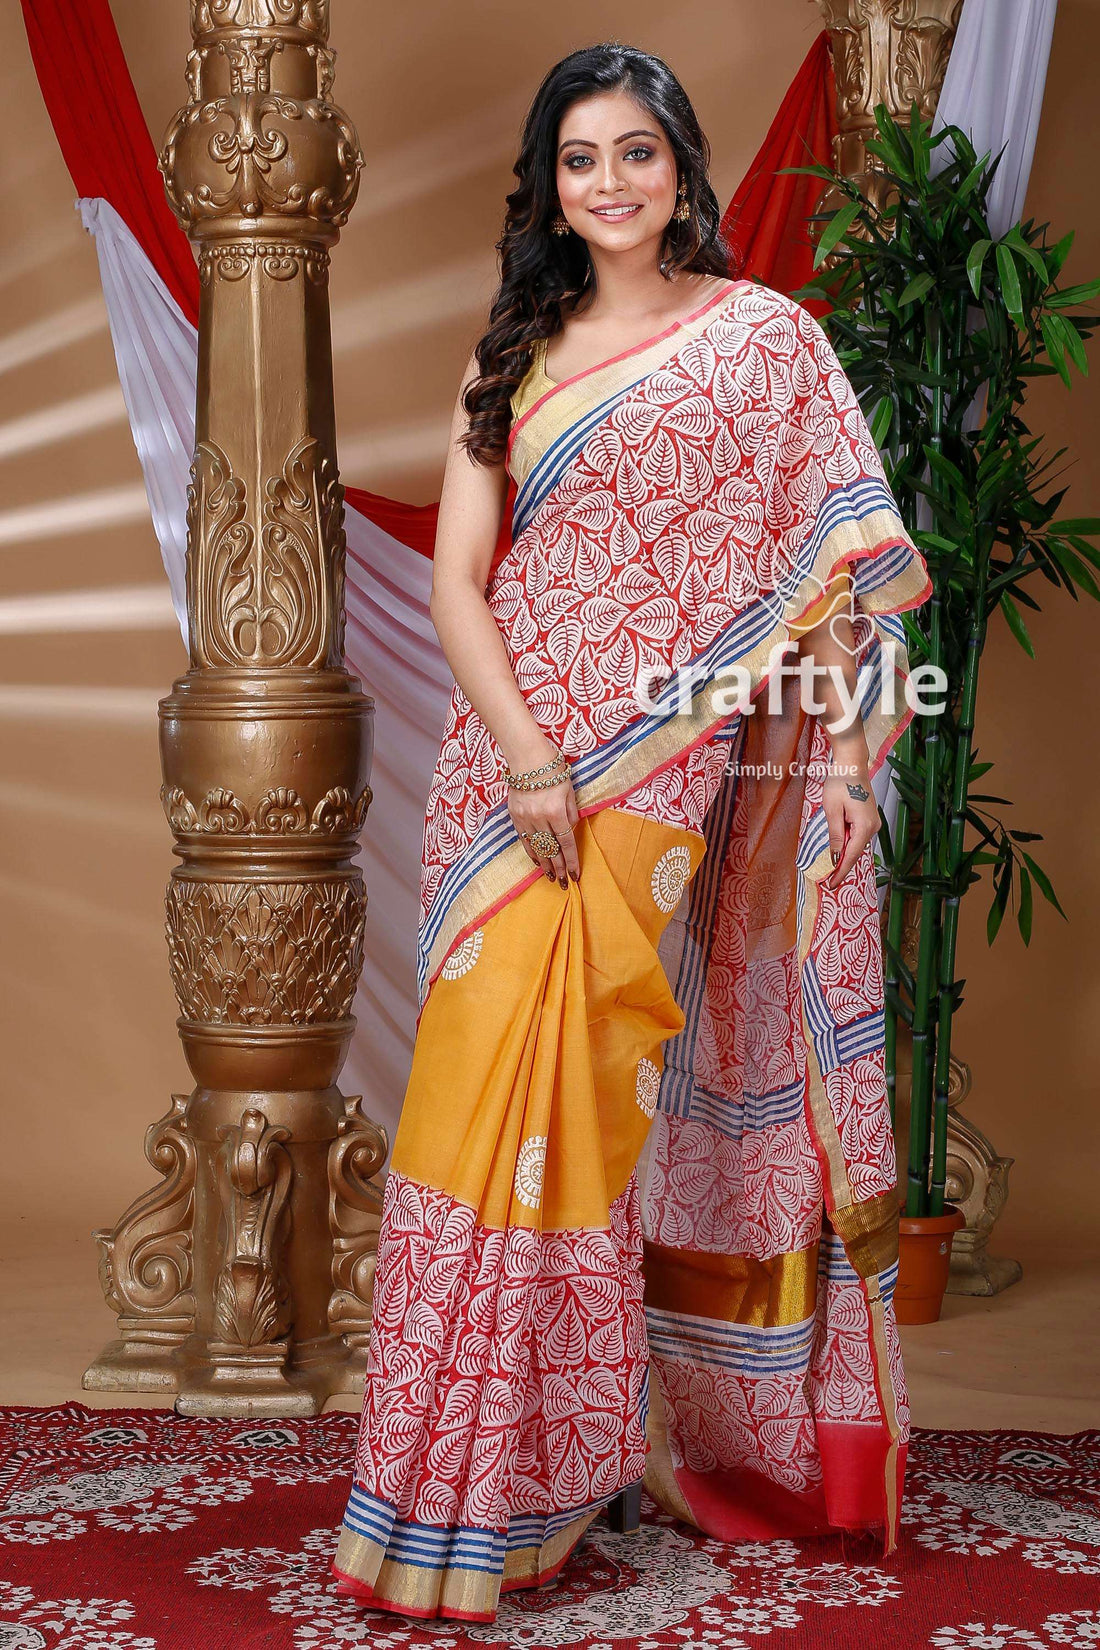 Leaf Design Red and Fire Yellow Hand Block Kerala Cotton Saree-Craftyle